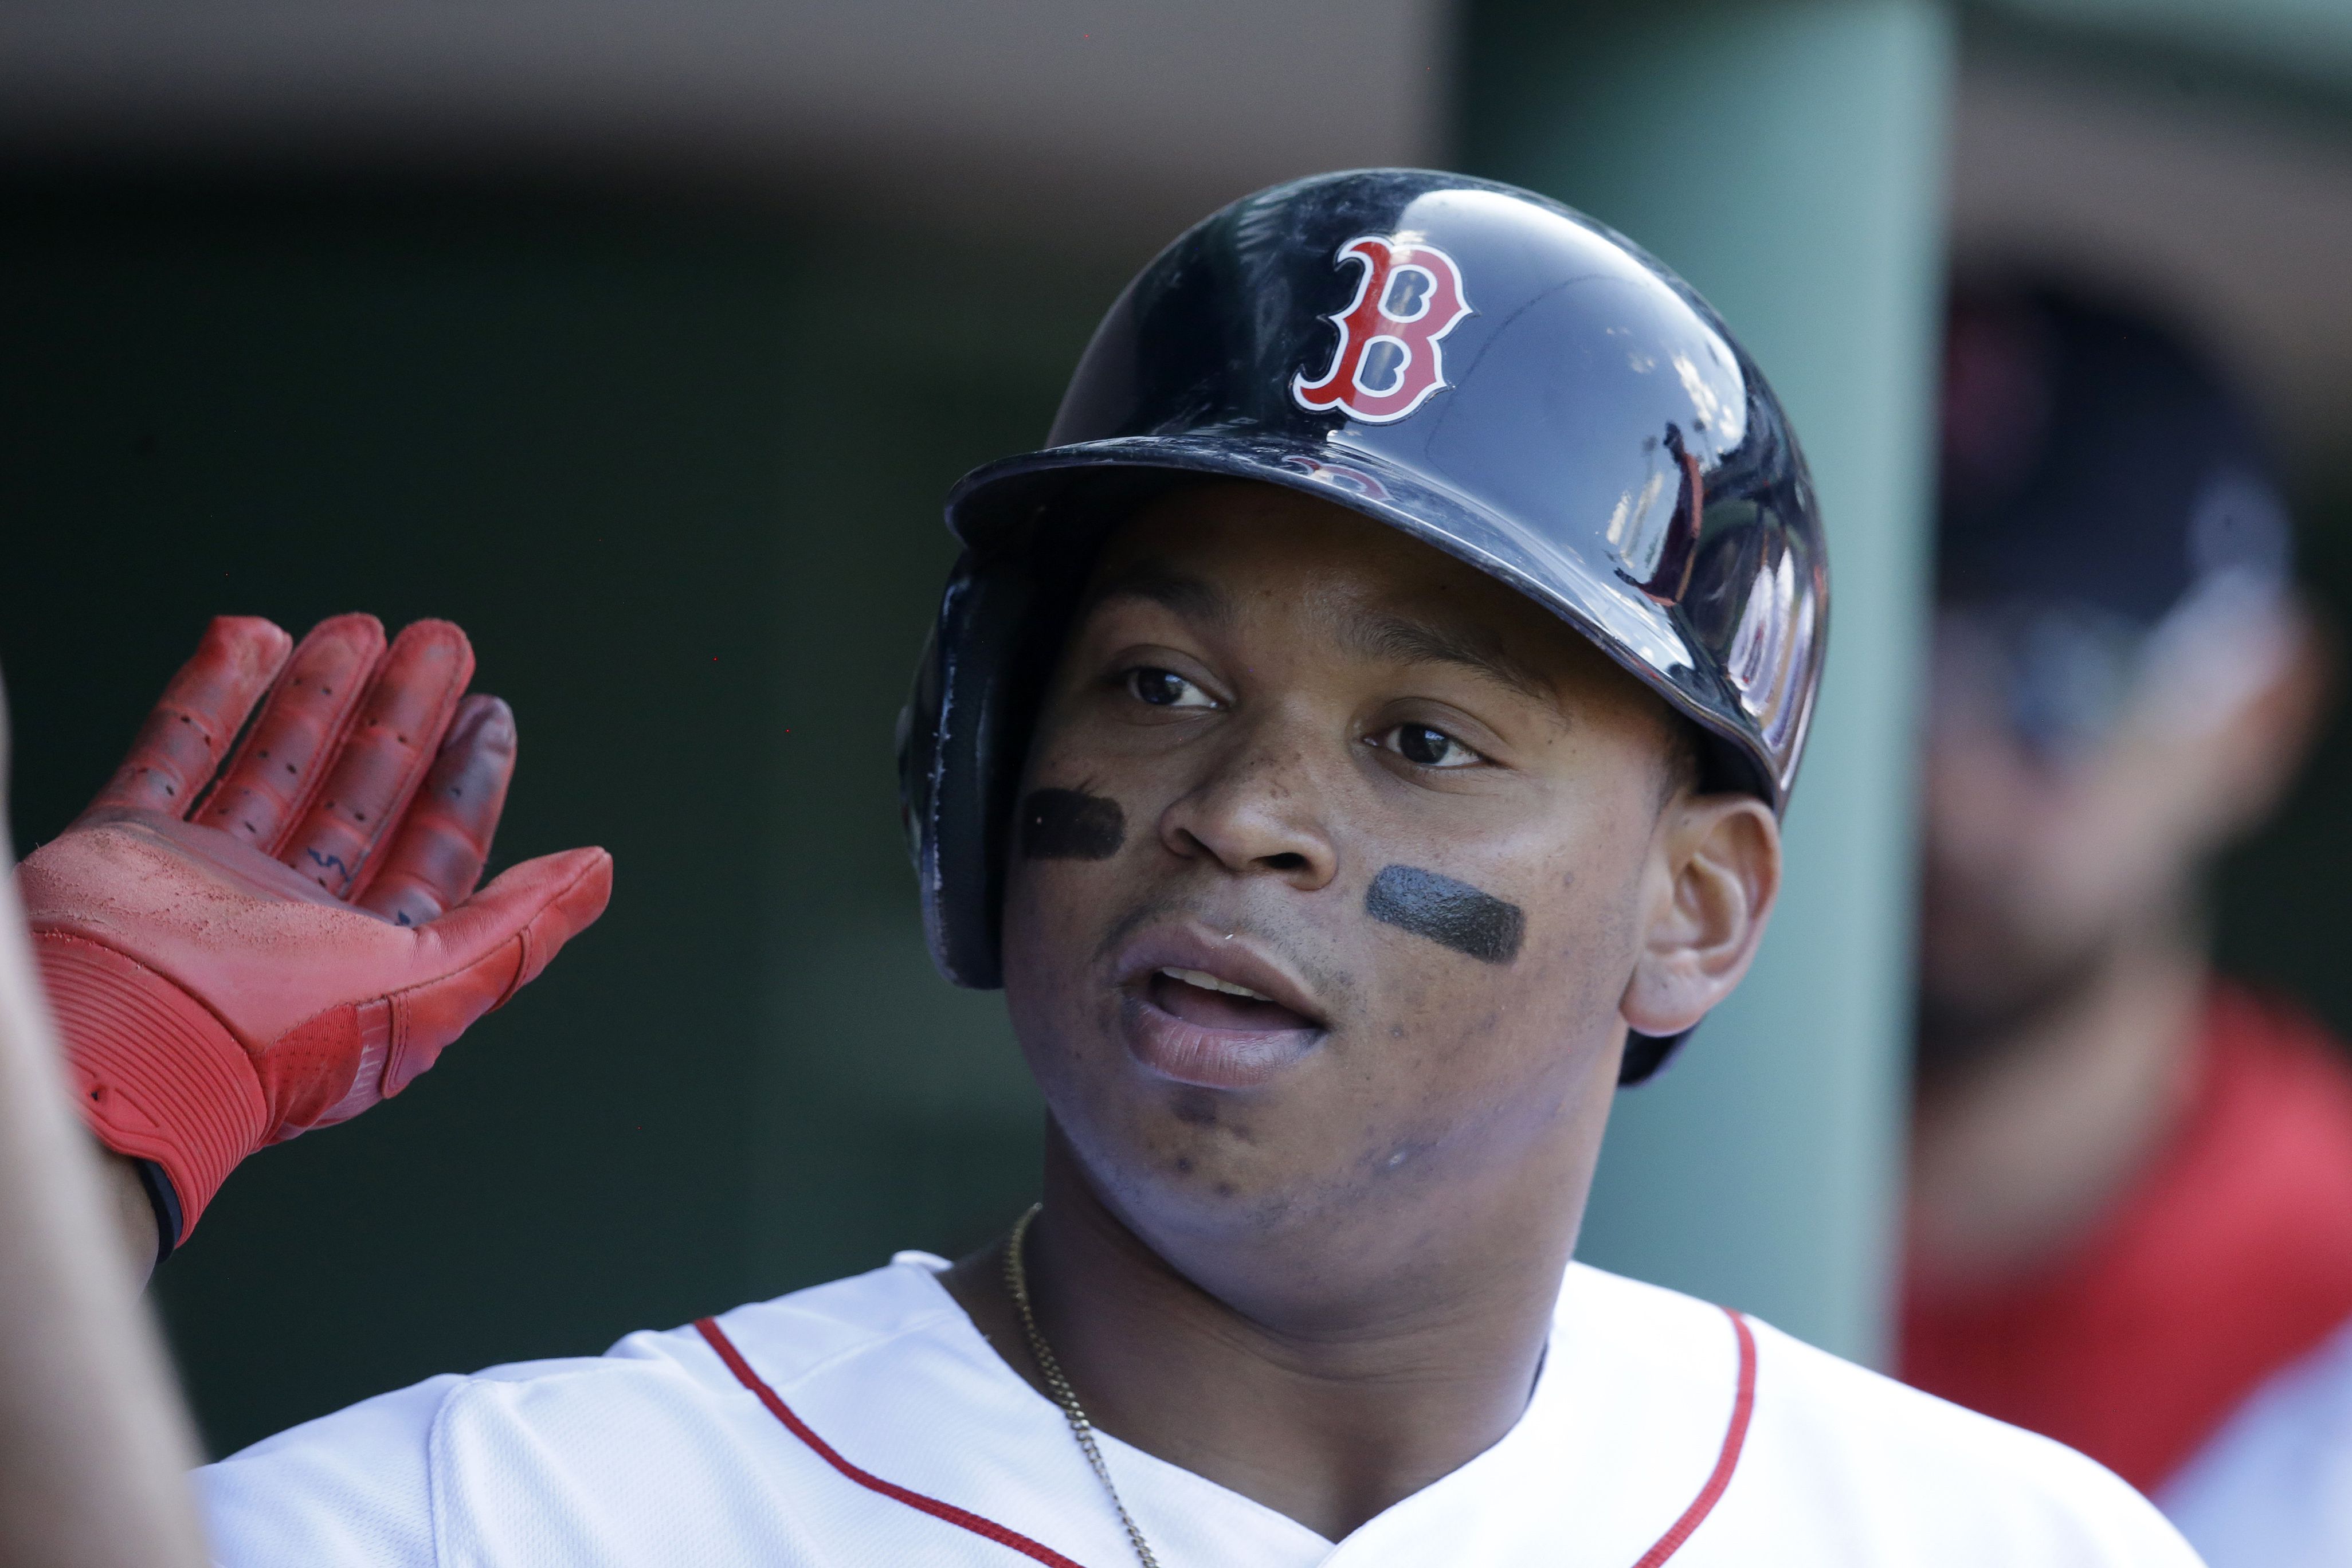 Boston Red Sox's Rafael Devers joins Whit Merrifield as only MLB players  with 200 hits in 2019 